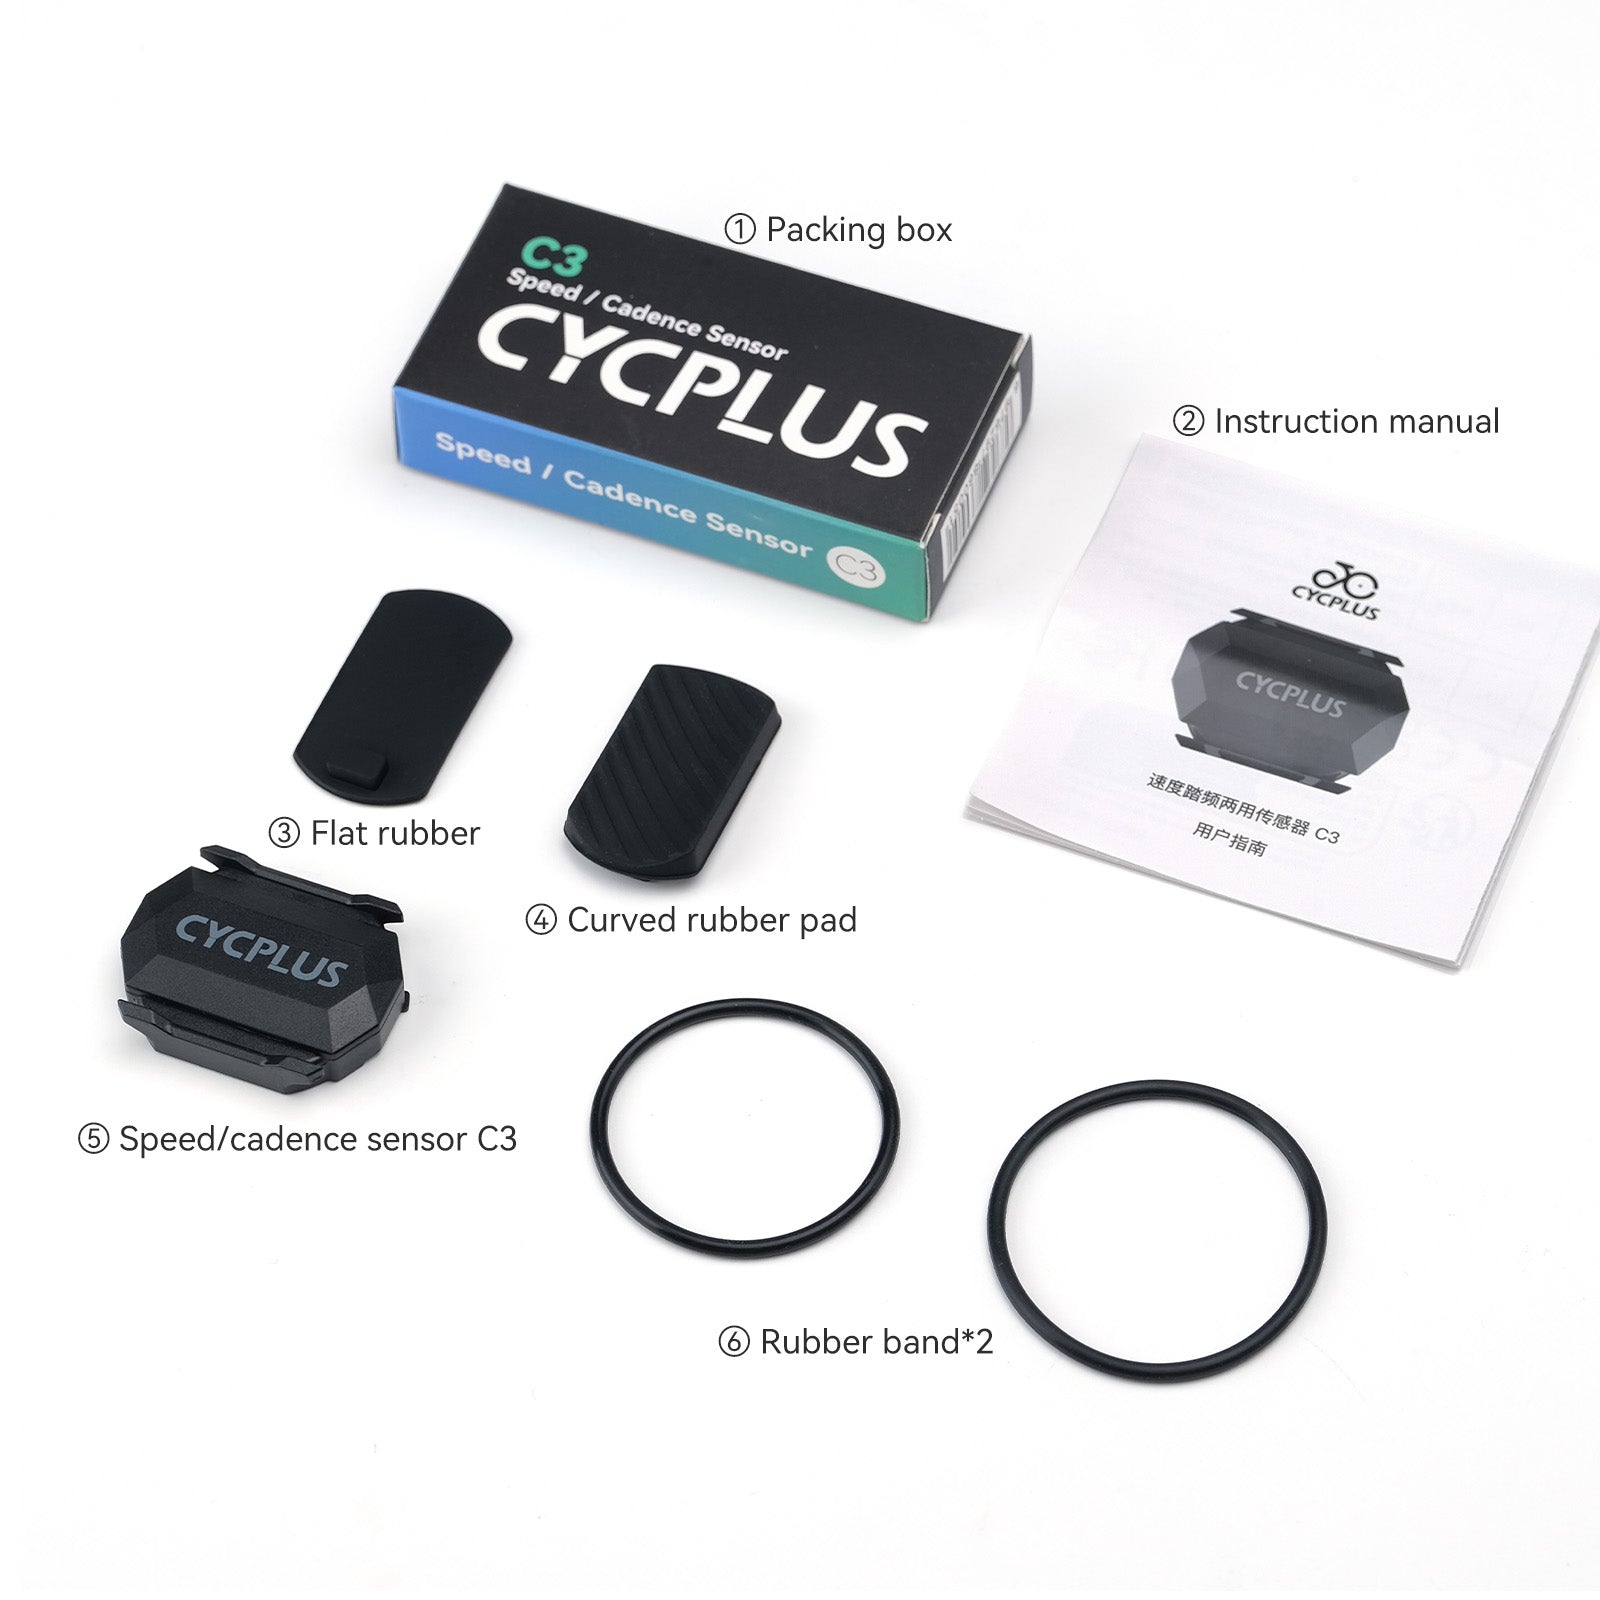 Pack of cadence/pedaling speed sensors for bicycles